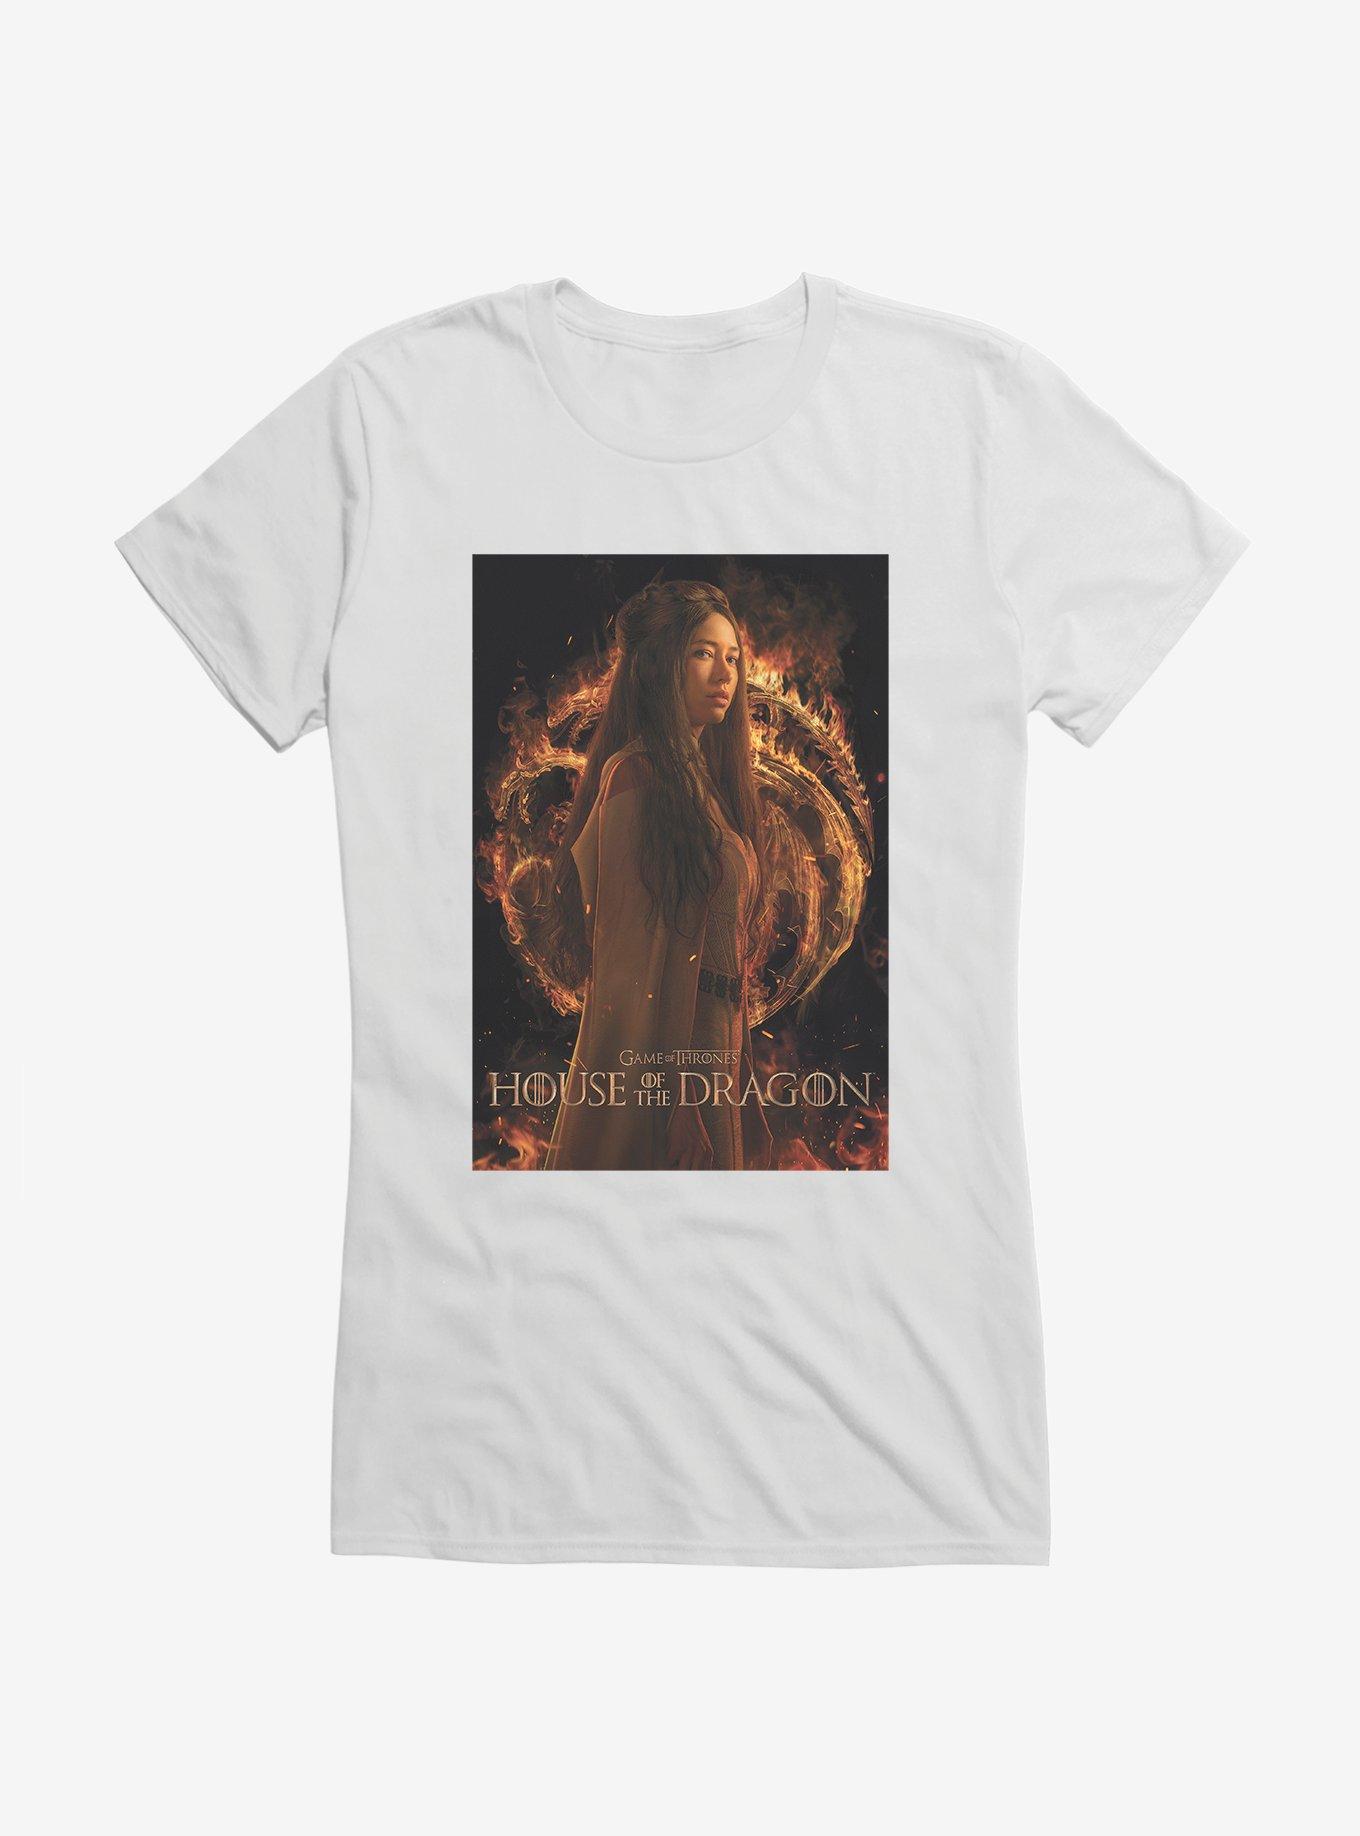 White Dragon and Tiger Shirt - House of the Dragon